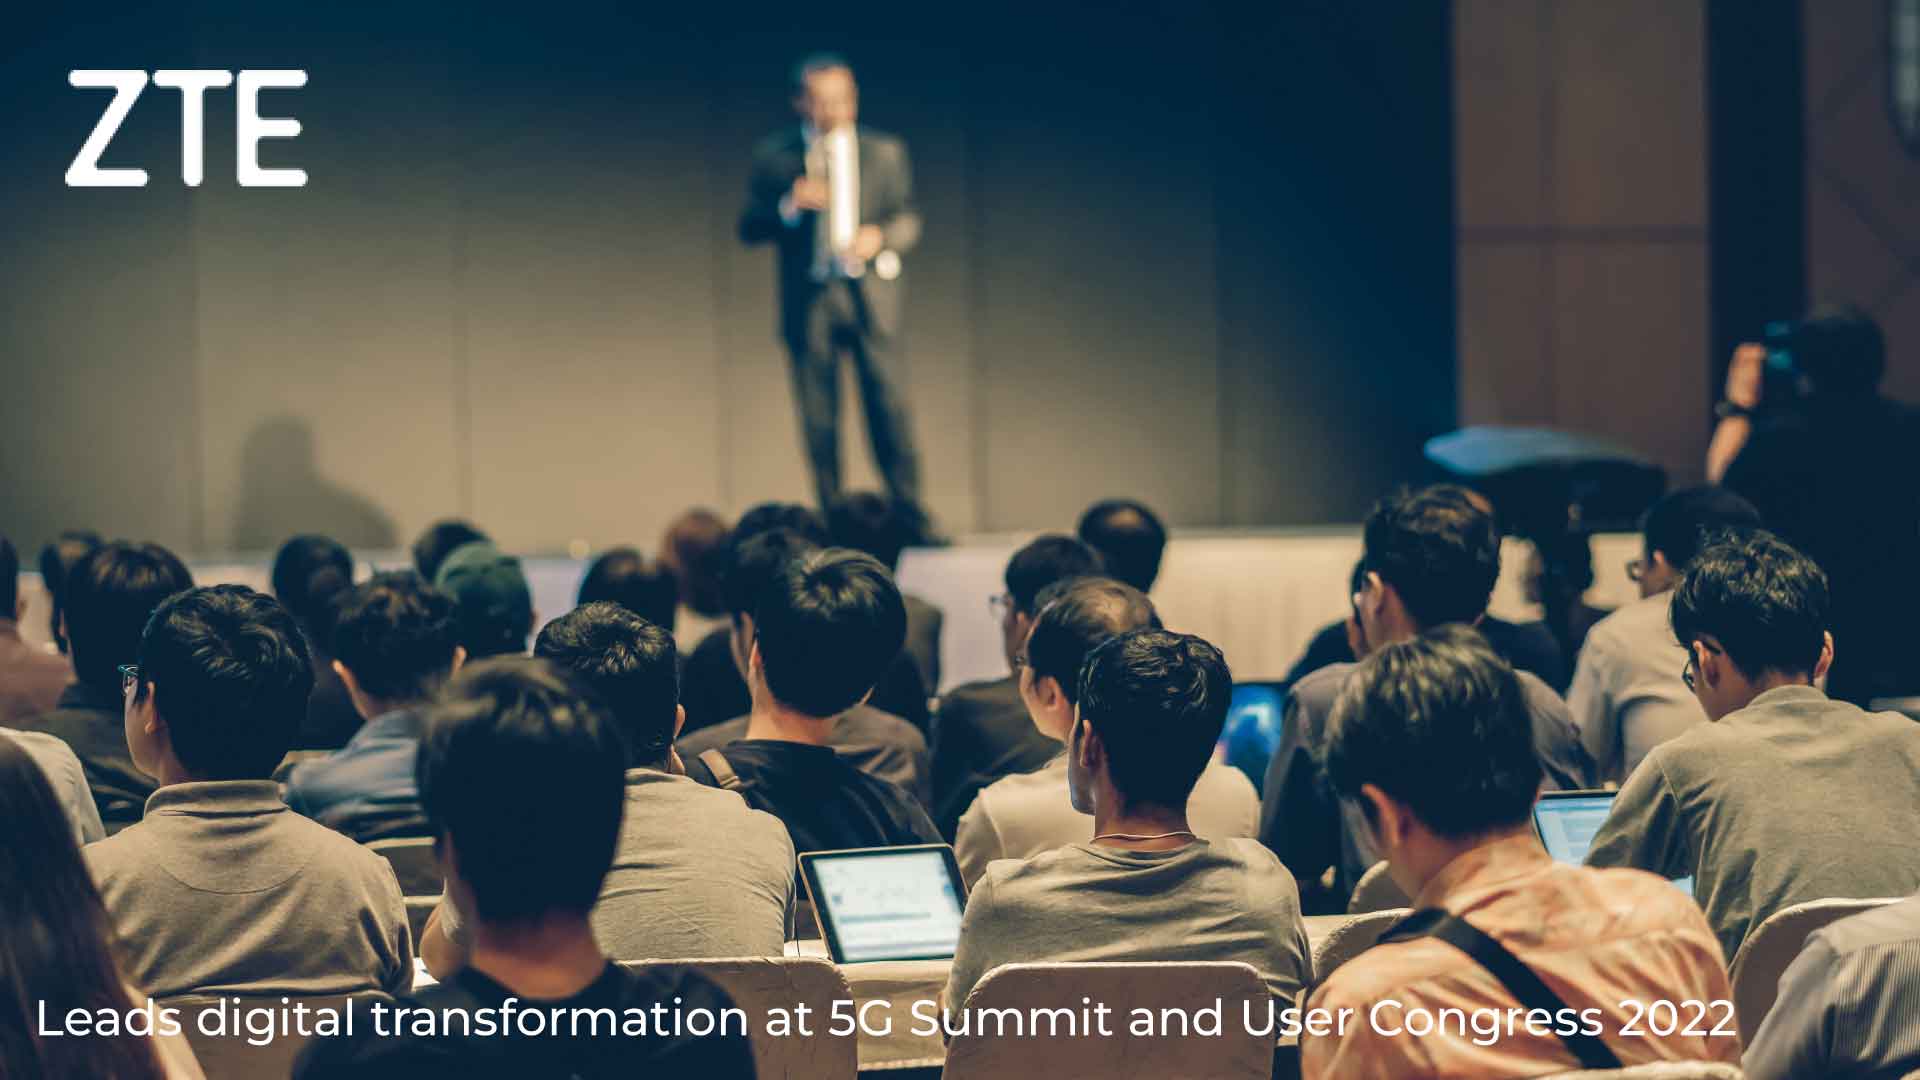 ZTE leads digital transformation at 5G Summit and User Congress 2022